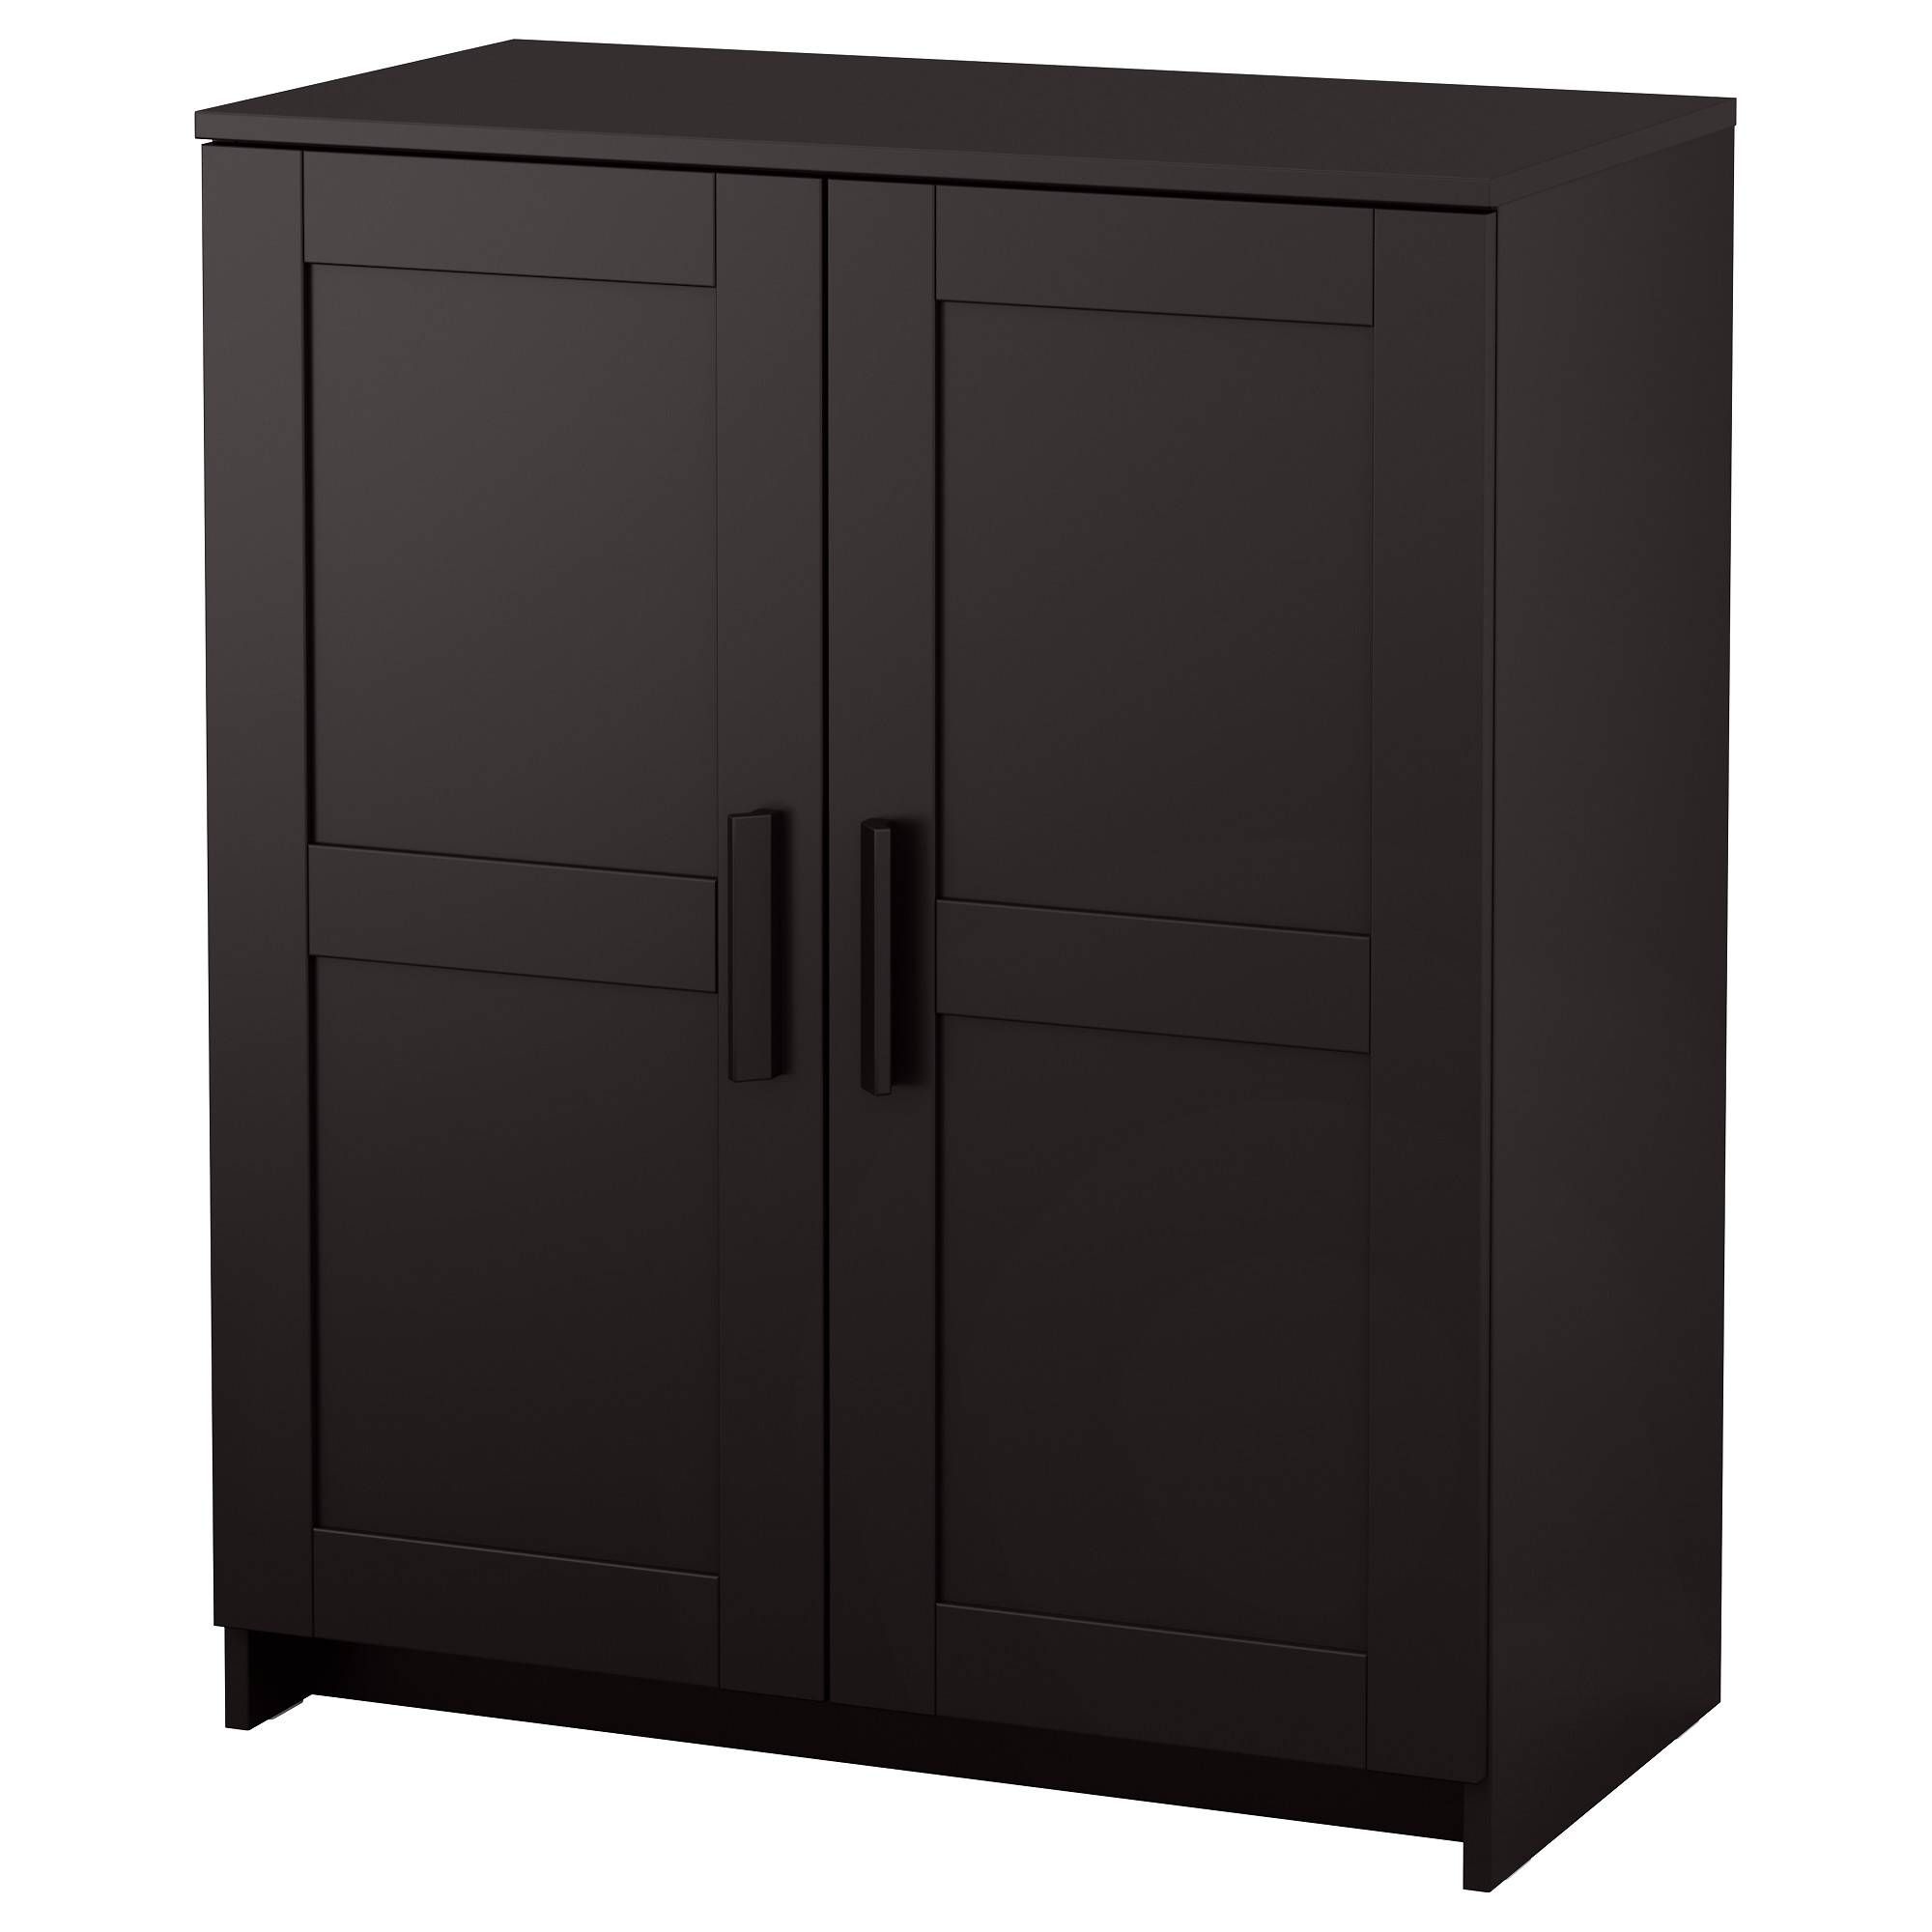 Cabinets & Sideboards – Ikea Inside Shallow Sideboard Cabinets (View 10 of 30)